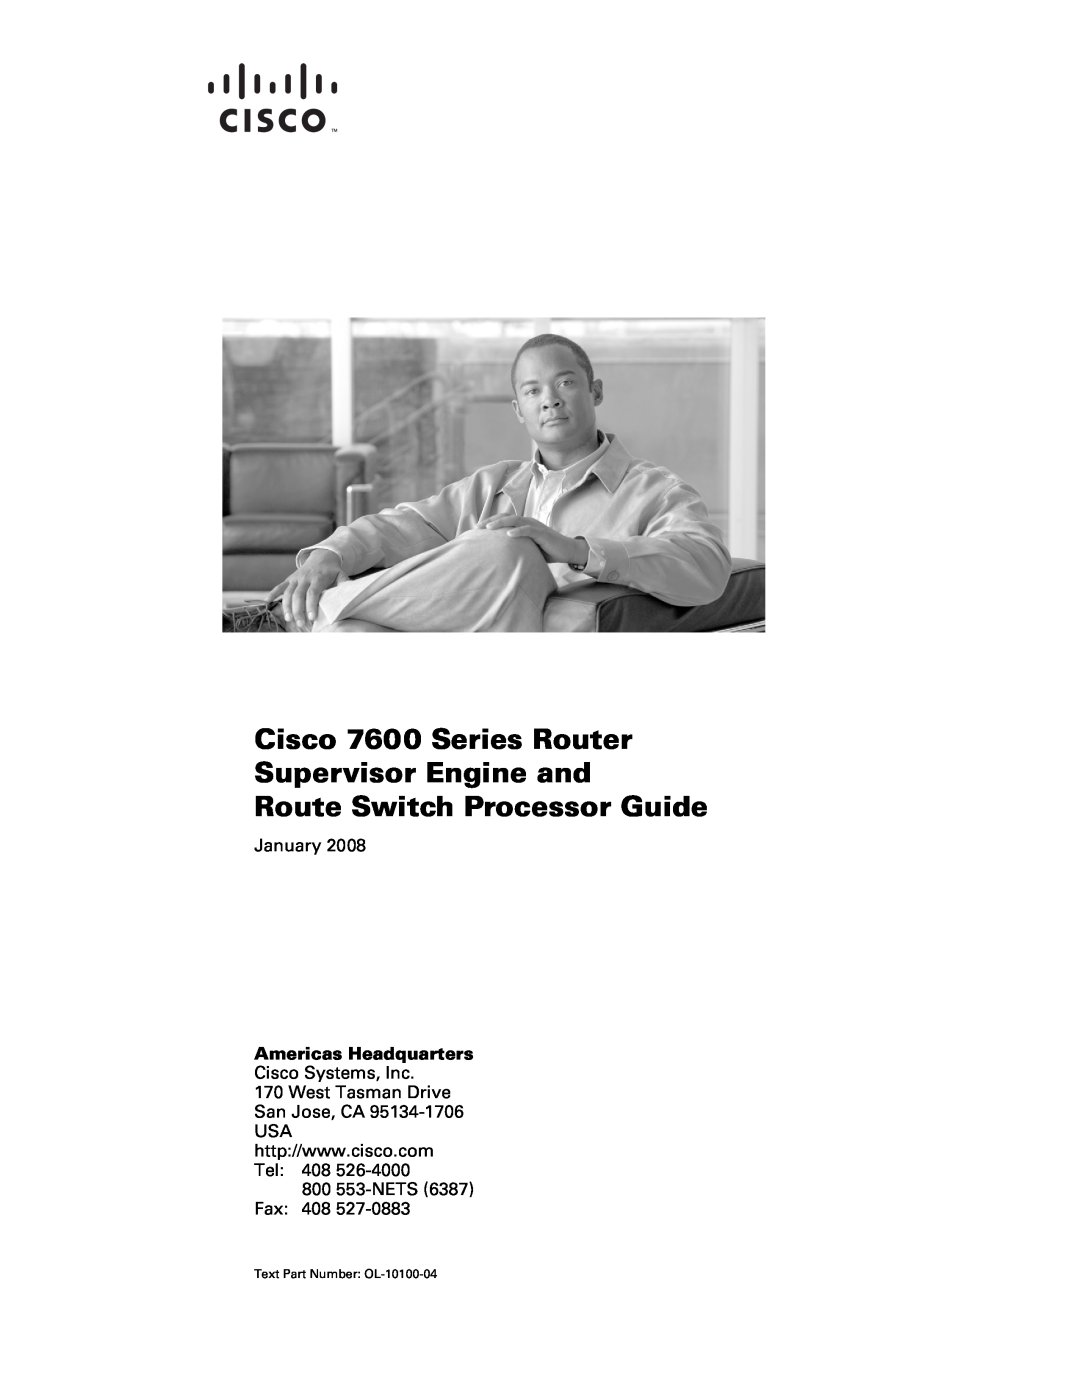 Cisco Systems manual Cisco 7600 Series Router Supervisor Engine and, Route Switch Processor Guide, January 